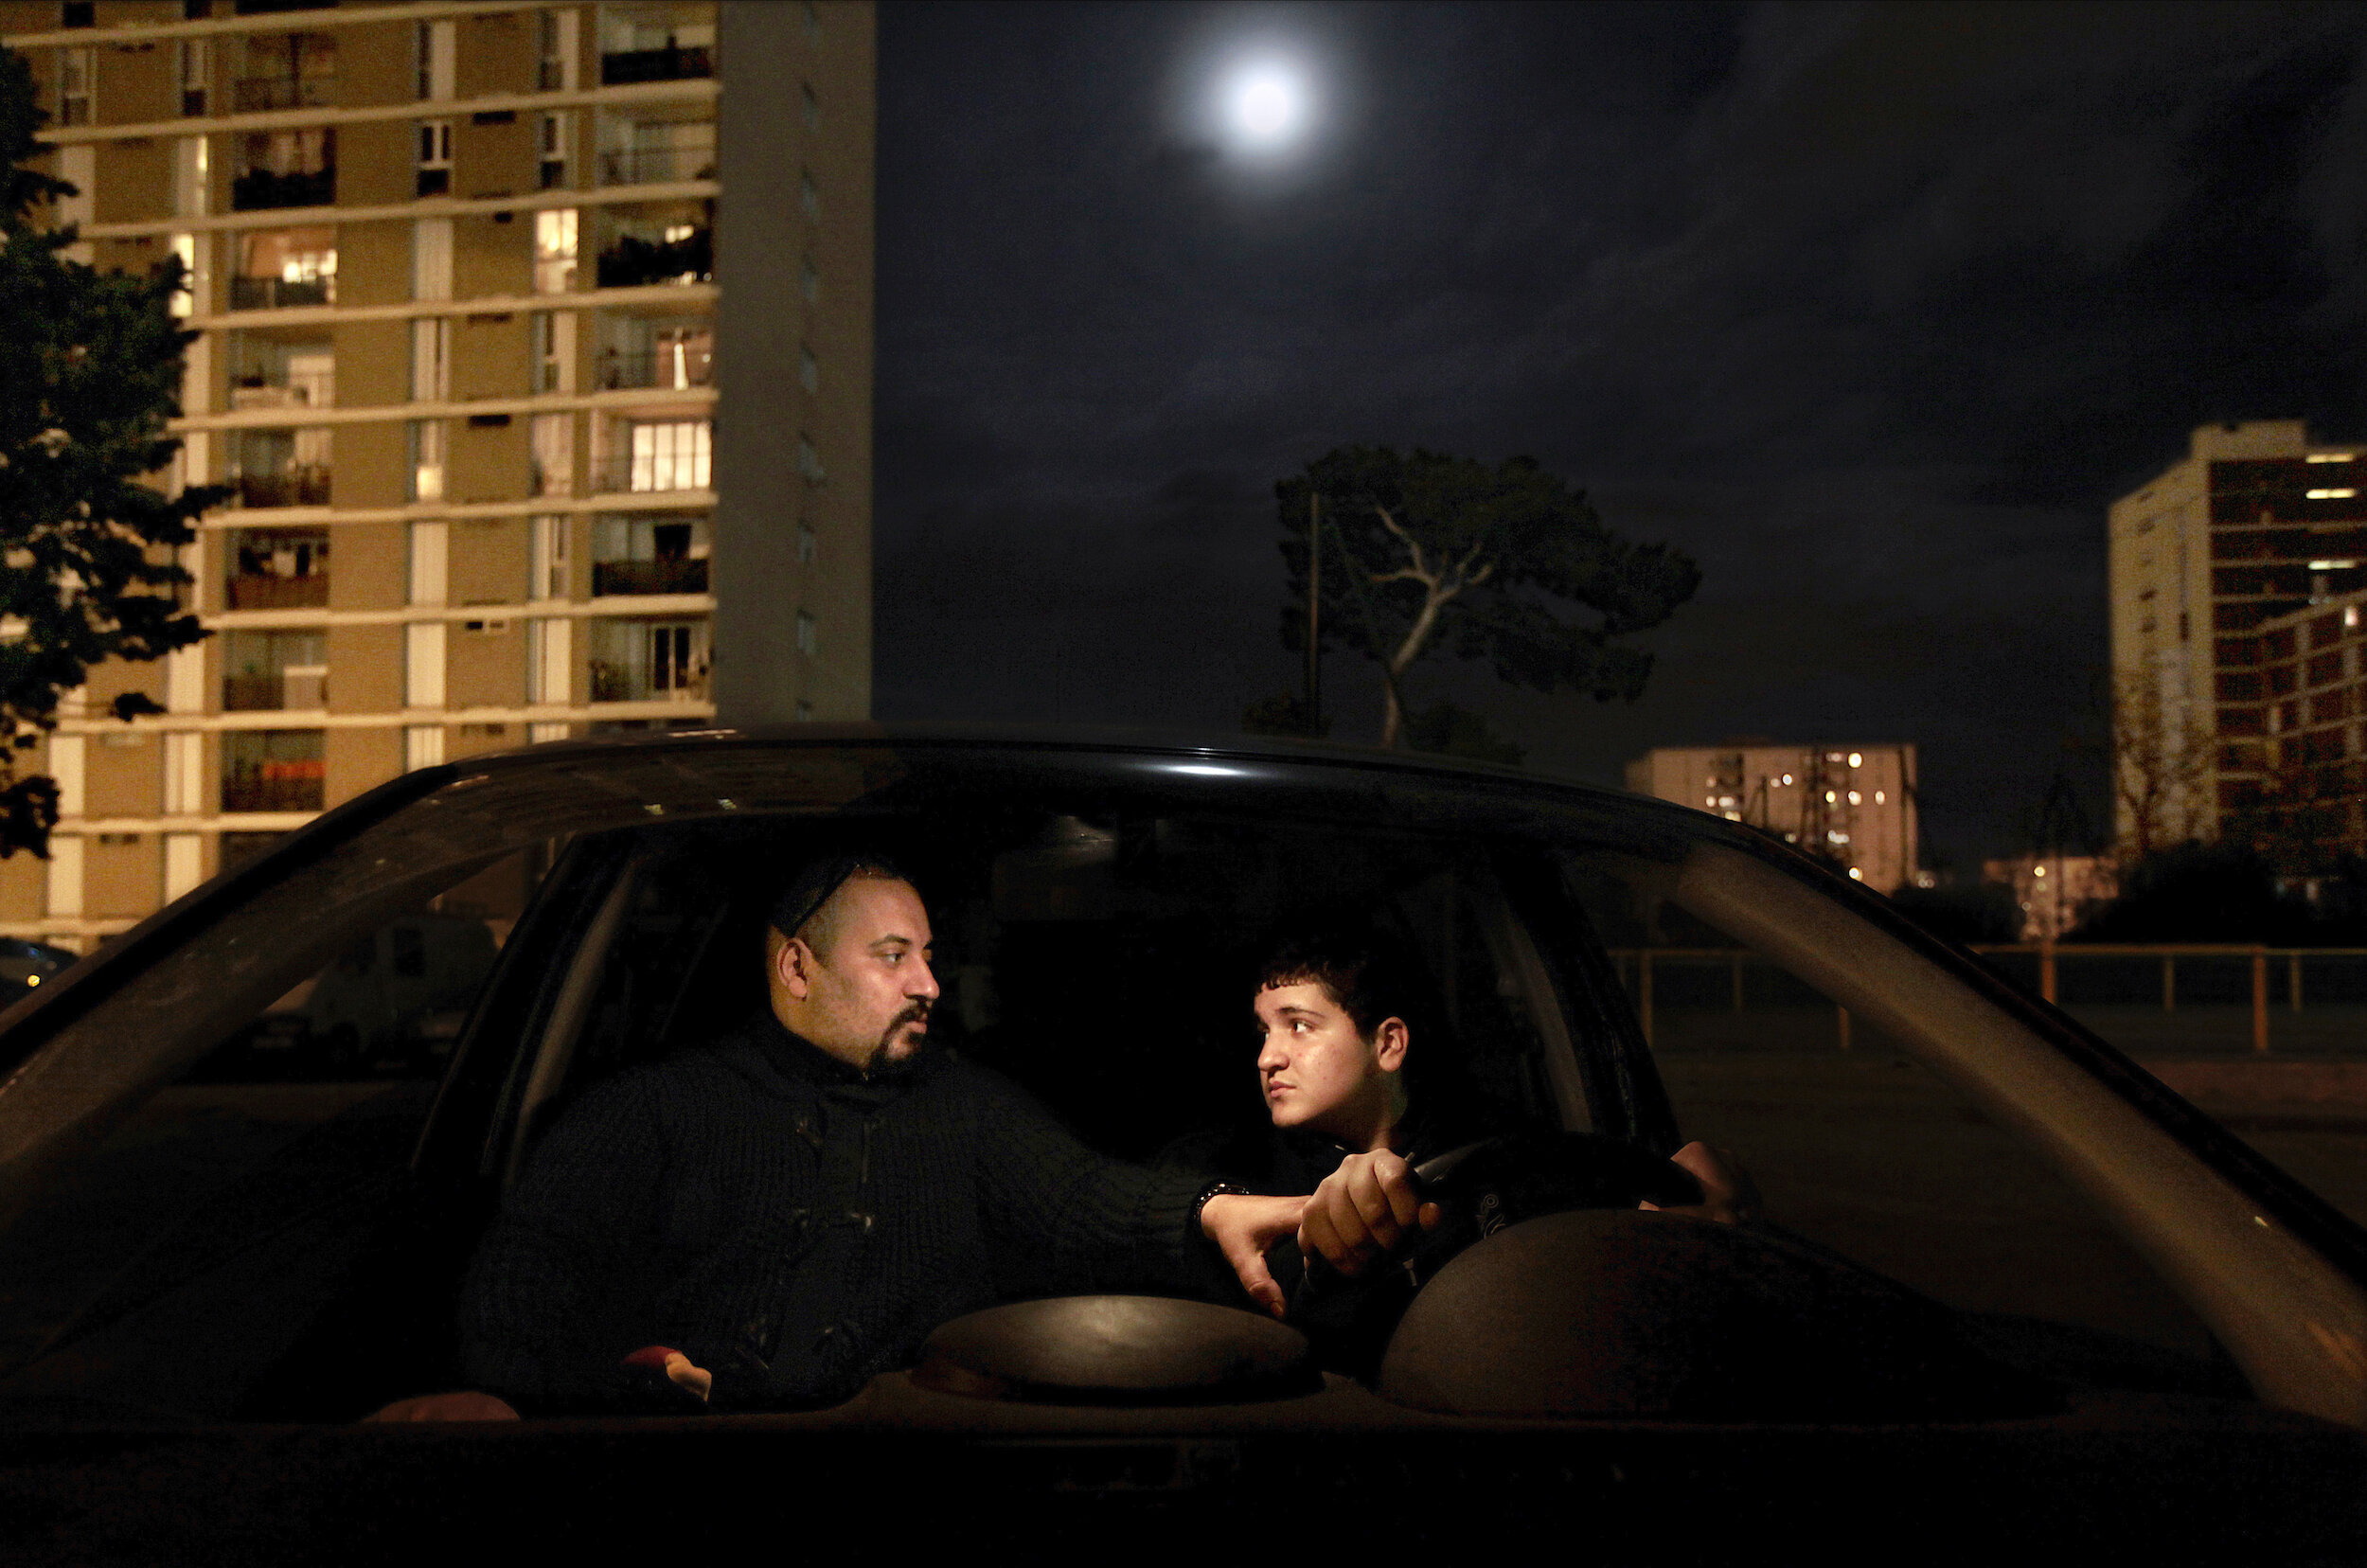     France. Marseille. 2012. Abdel Benfrih [right] was trying to convince his uncle to let him drive the car but his uncle refused, as Abdel is a minor without a driving license. Abdel and his family lives in a cité – social housing project – in the 